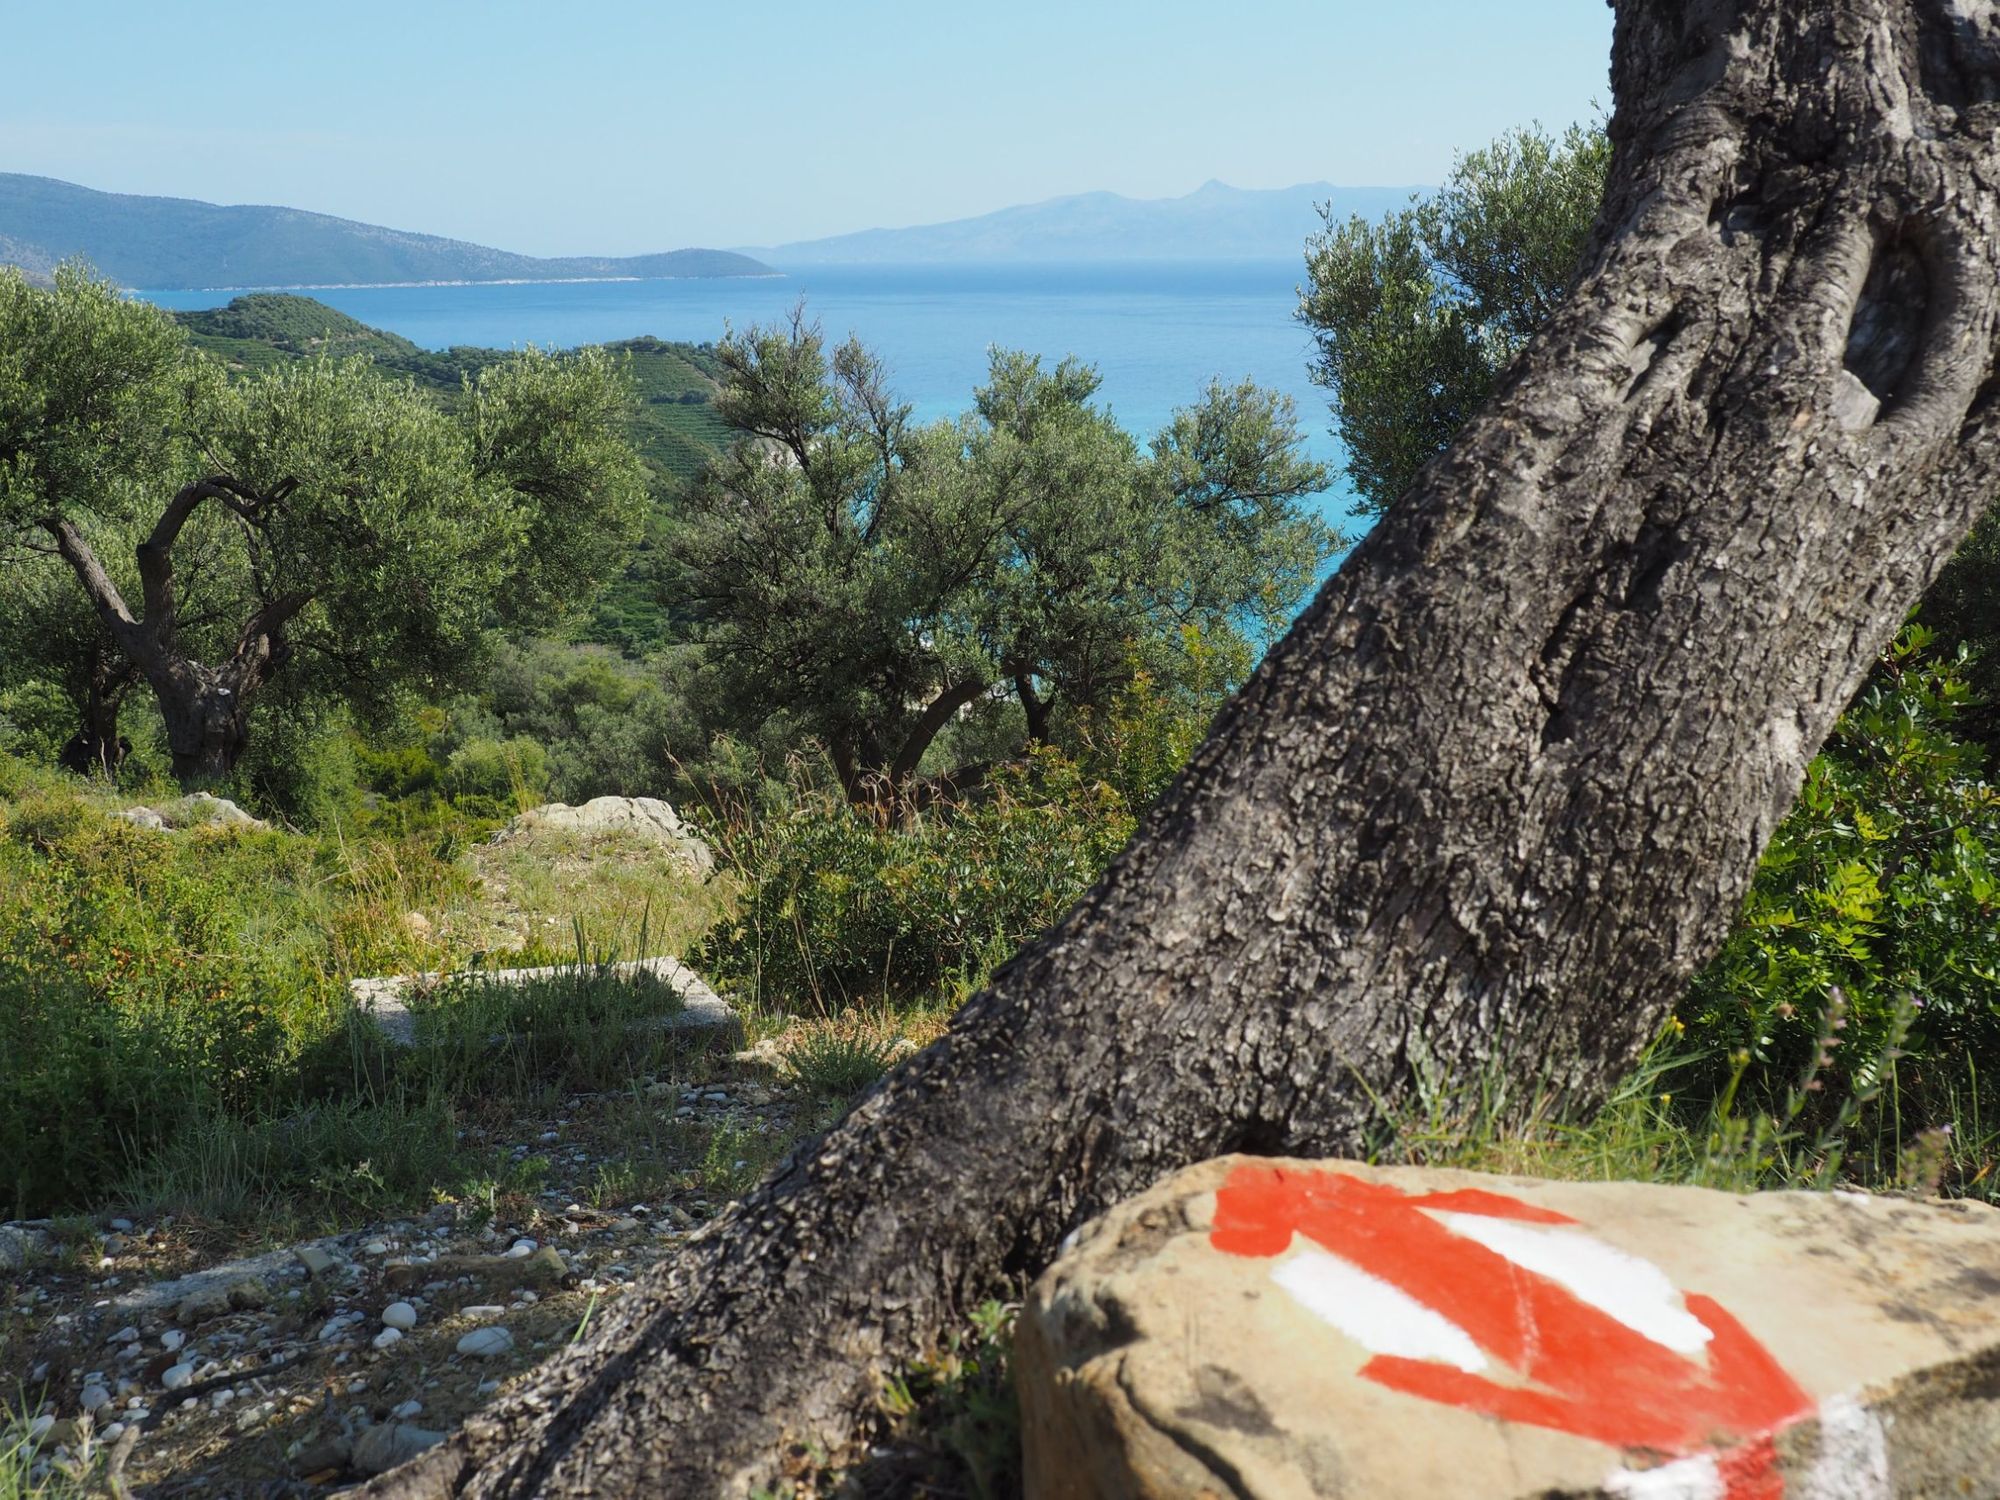 A hilltop view loooking back out to the Ionian Sea, with the waymarking of the Albanian Coastal Trail. Photo: Ricardo Fahrig